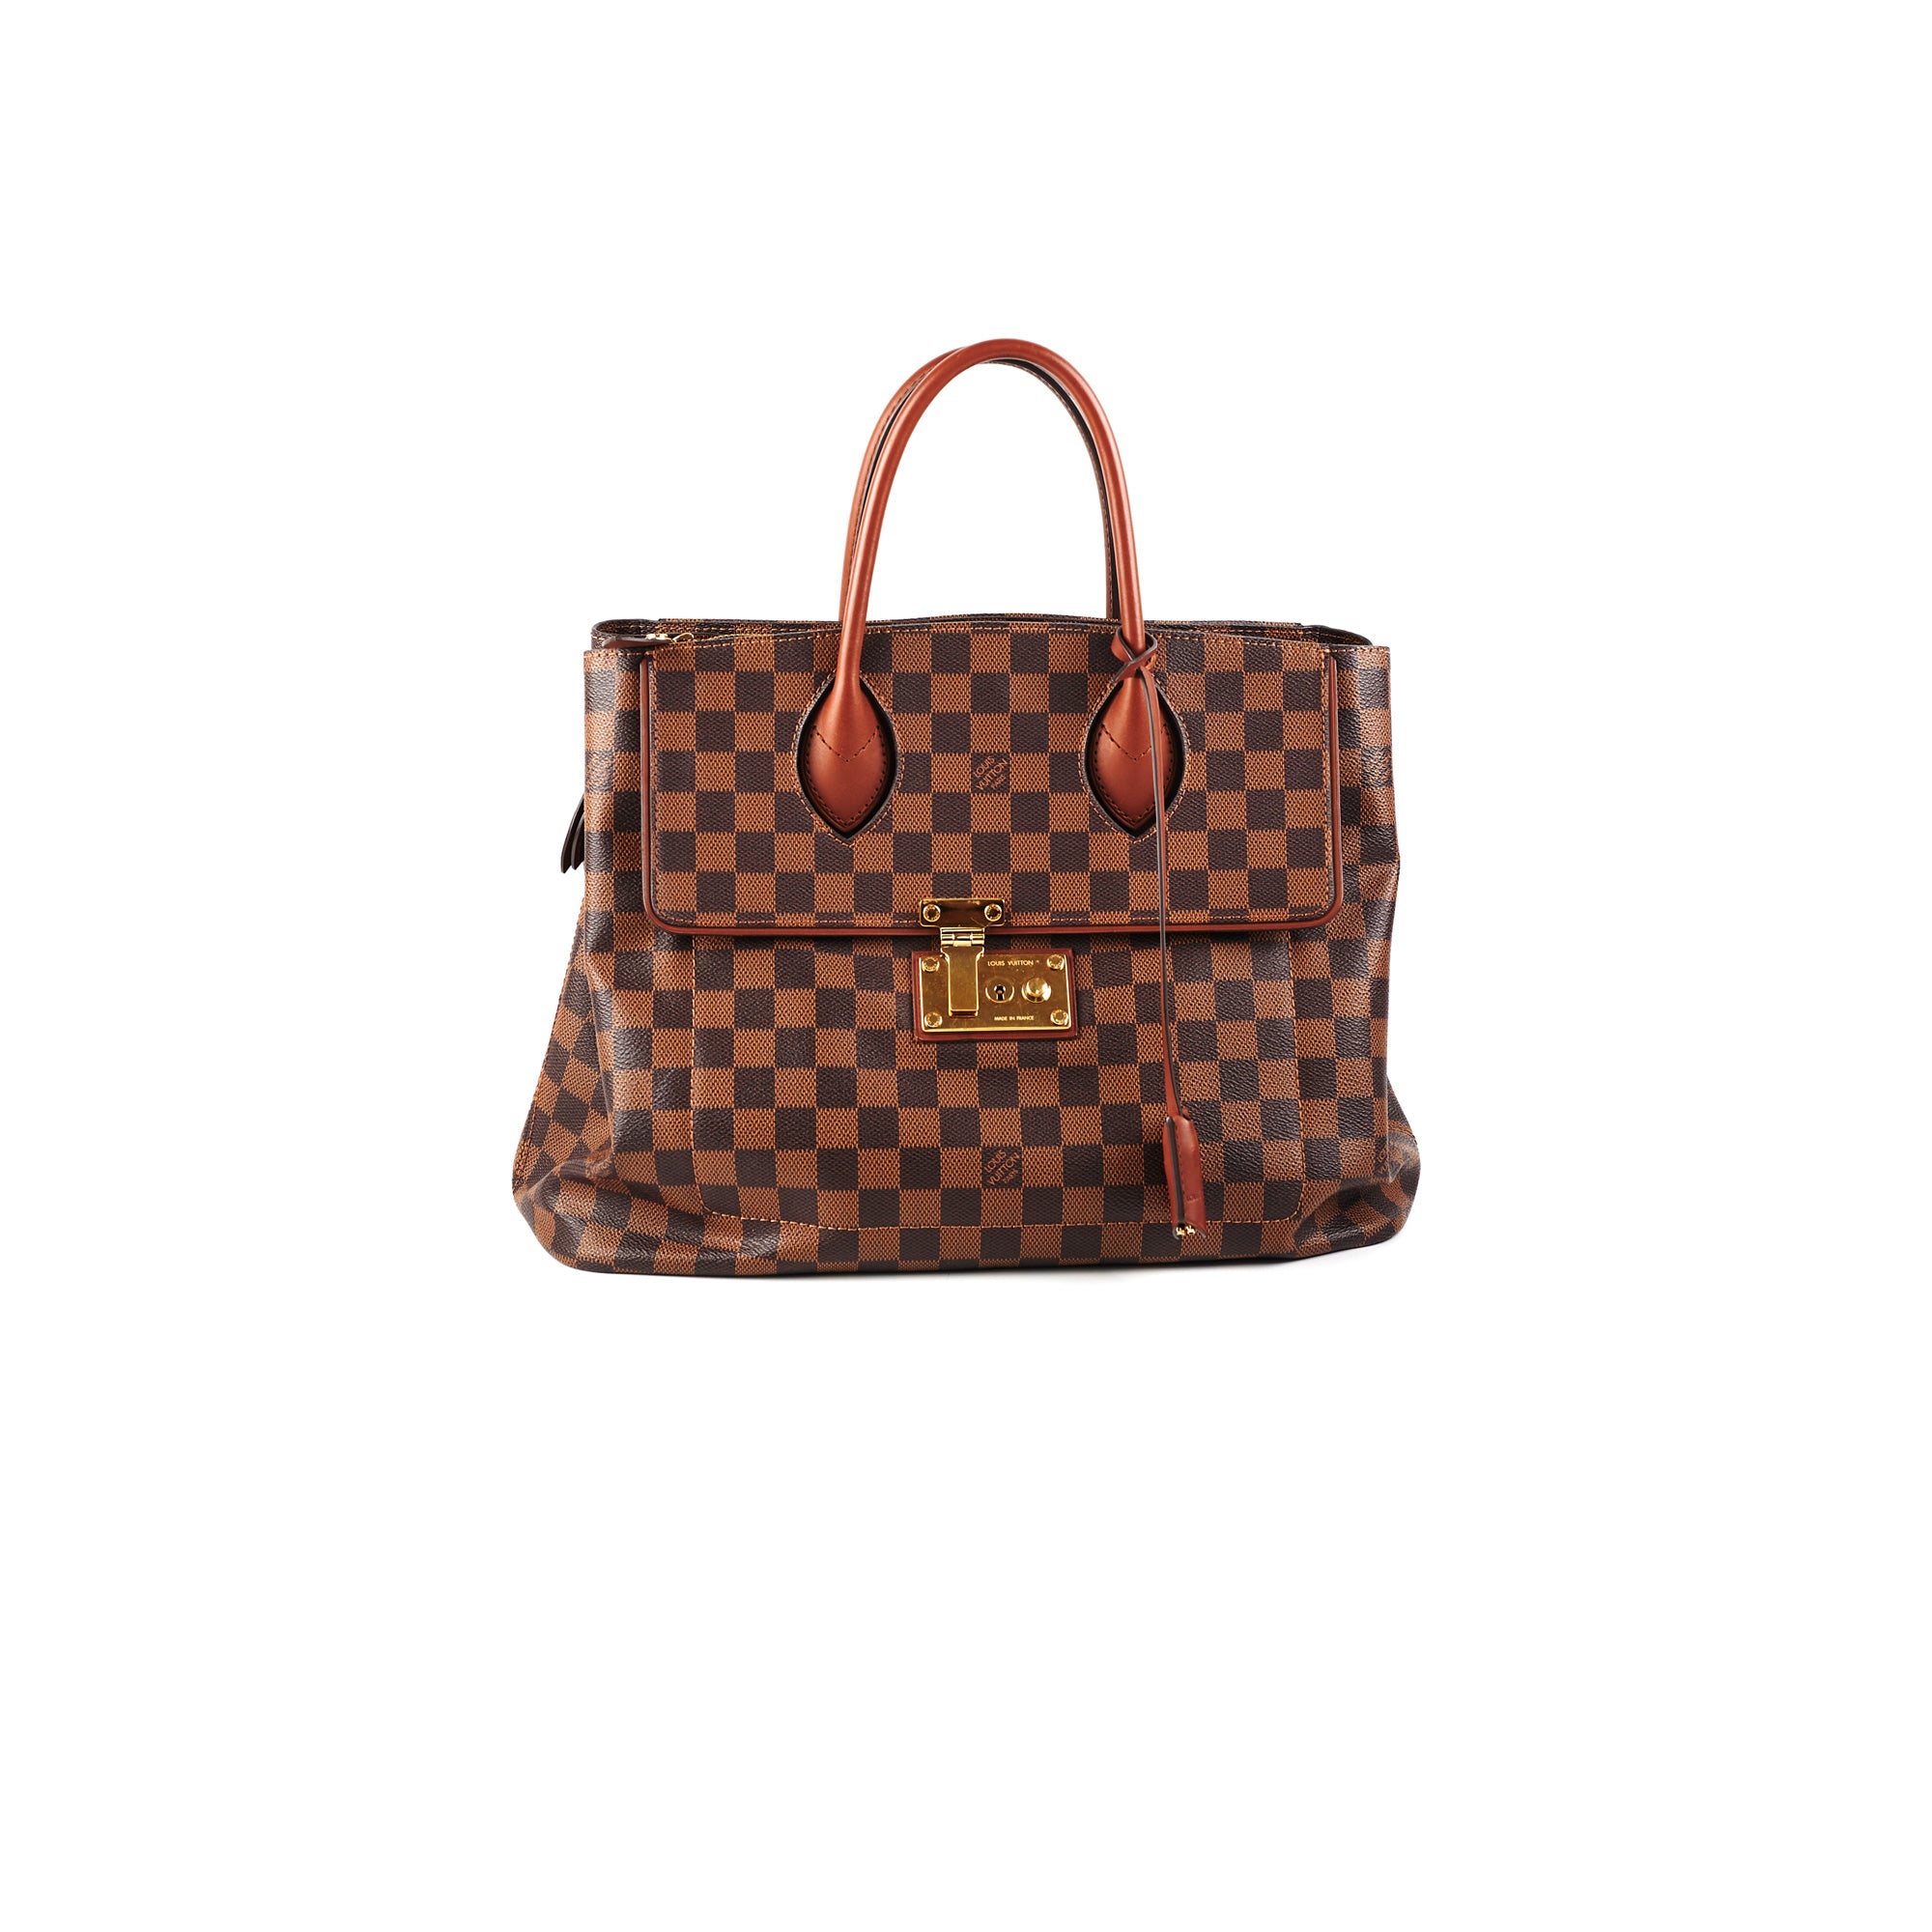 This rare discontinued piece is called Ascot in Damier Ebene. Do